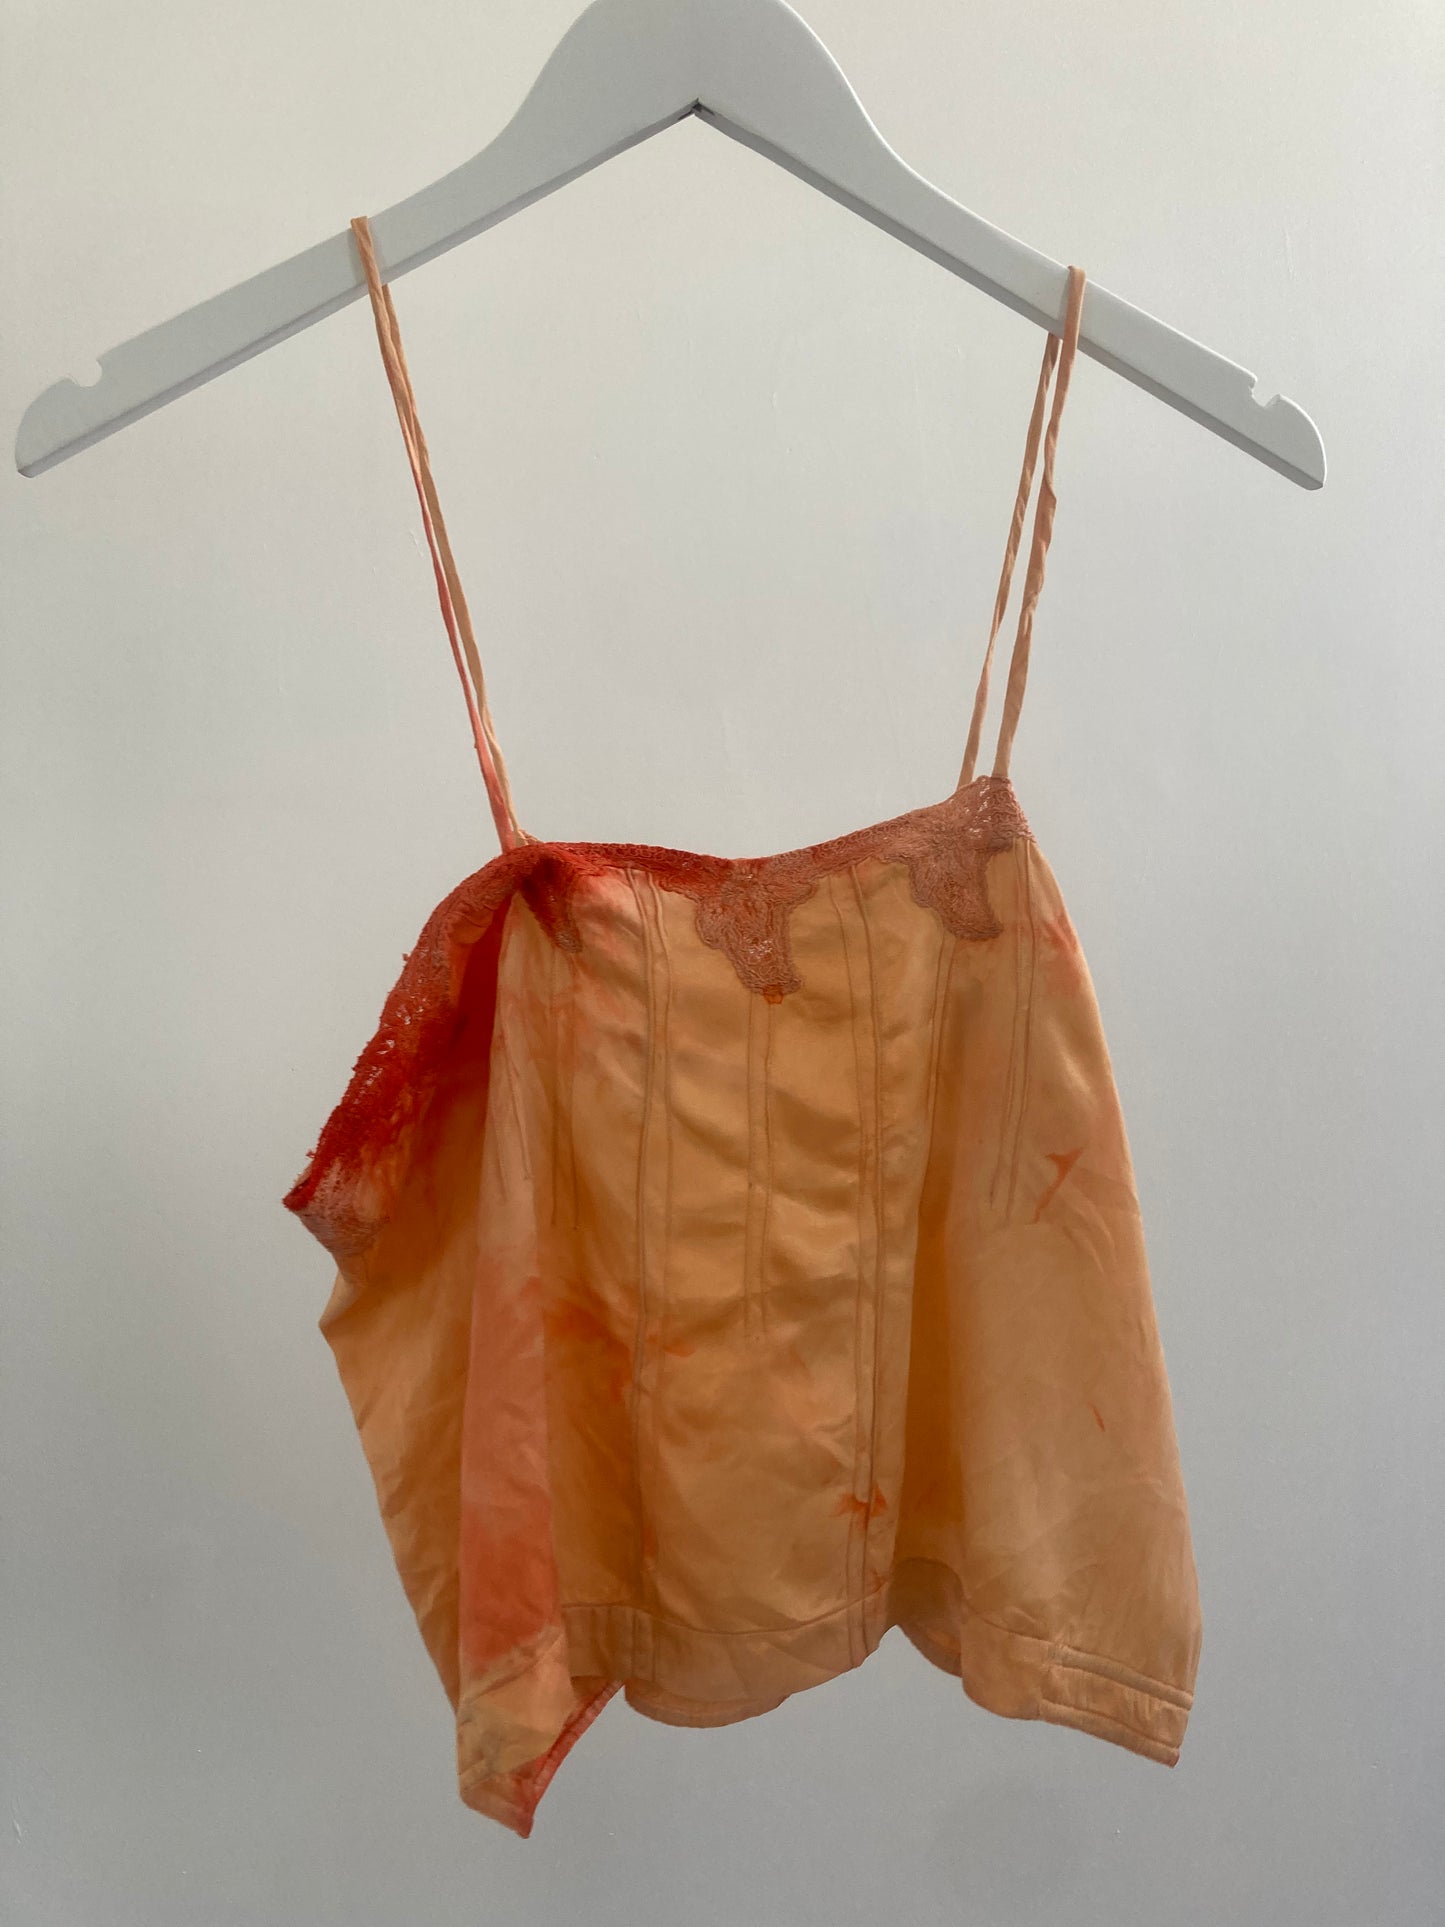 1930s Satin & Lace Dyed Camisole - Aperol